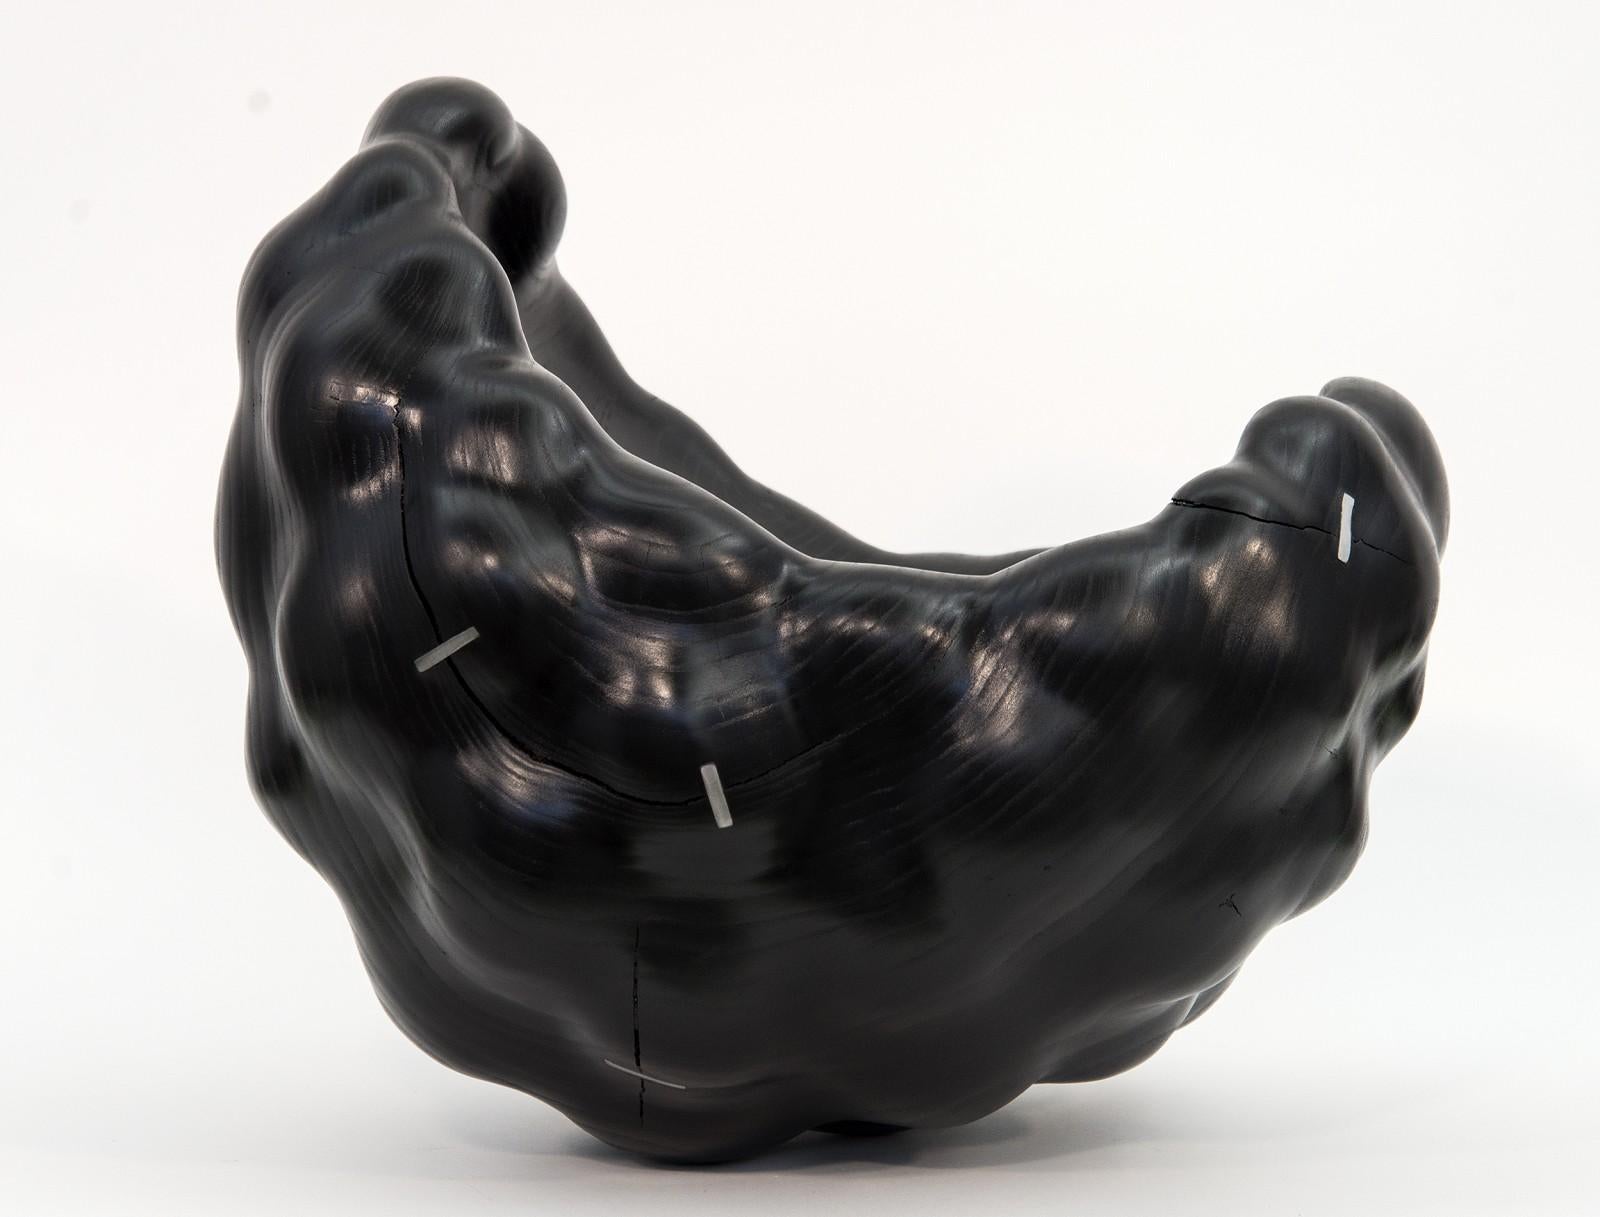 Biomorphic No 14 - smooth, carved, stained, polished wood, abstract sculpture - Sculpture by Jana Osterman